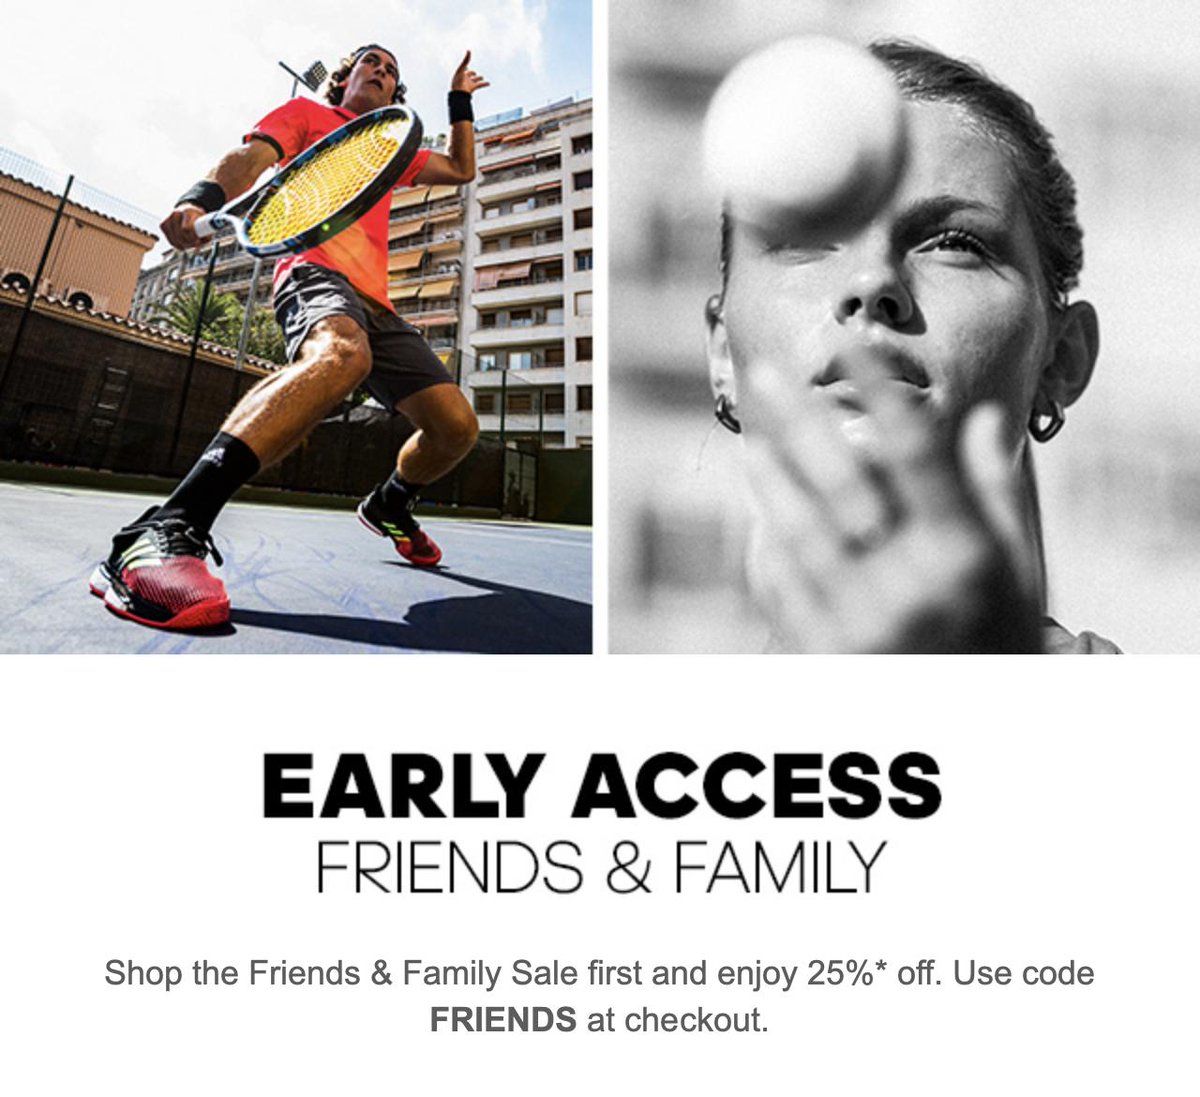 adidas friends and family sale 2019